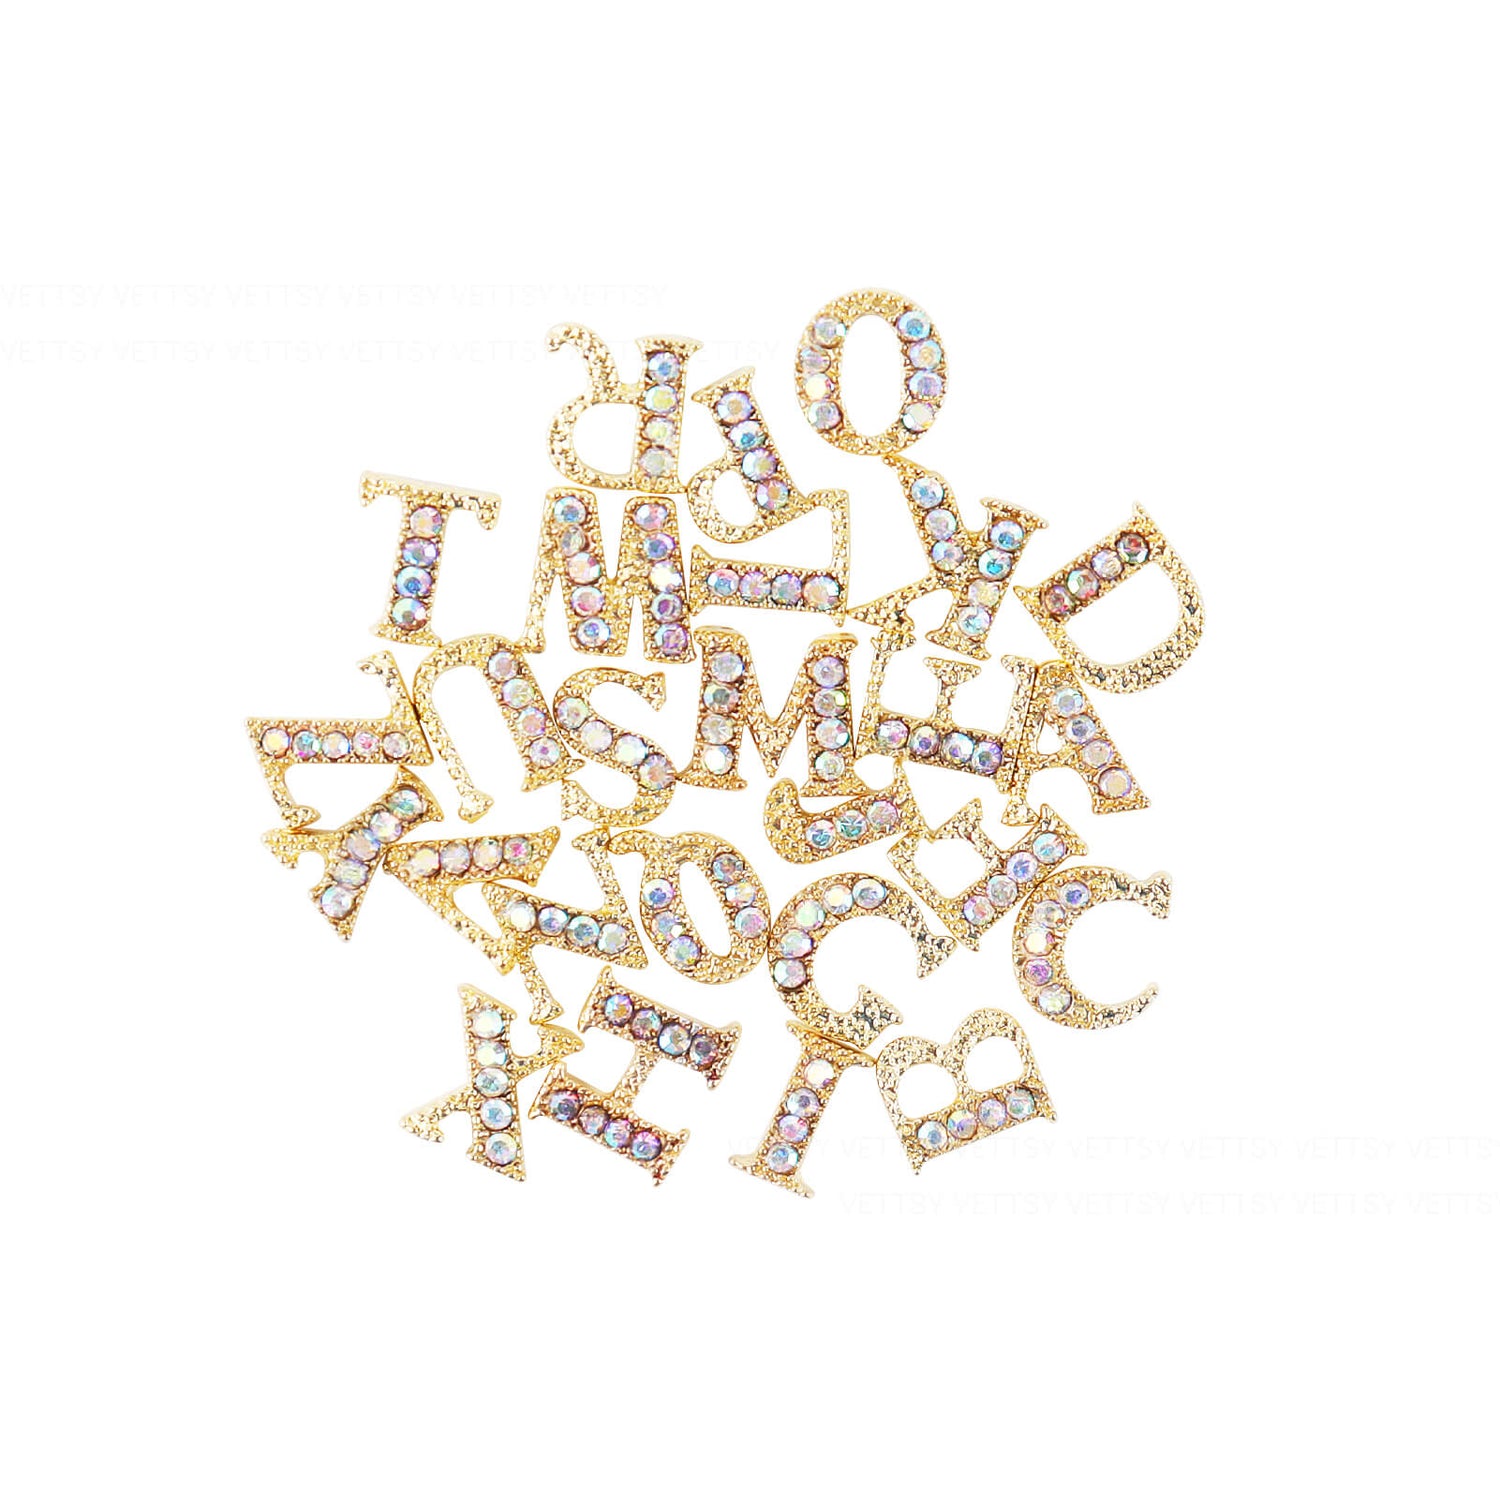 26pcs Letter Charms Rhinestone Letter Charms Necklace Charms